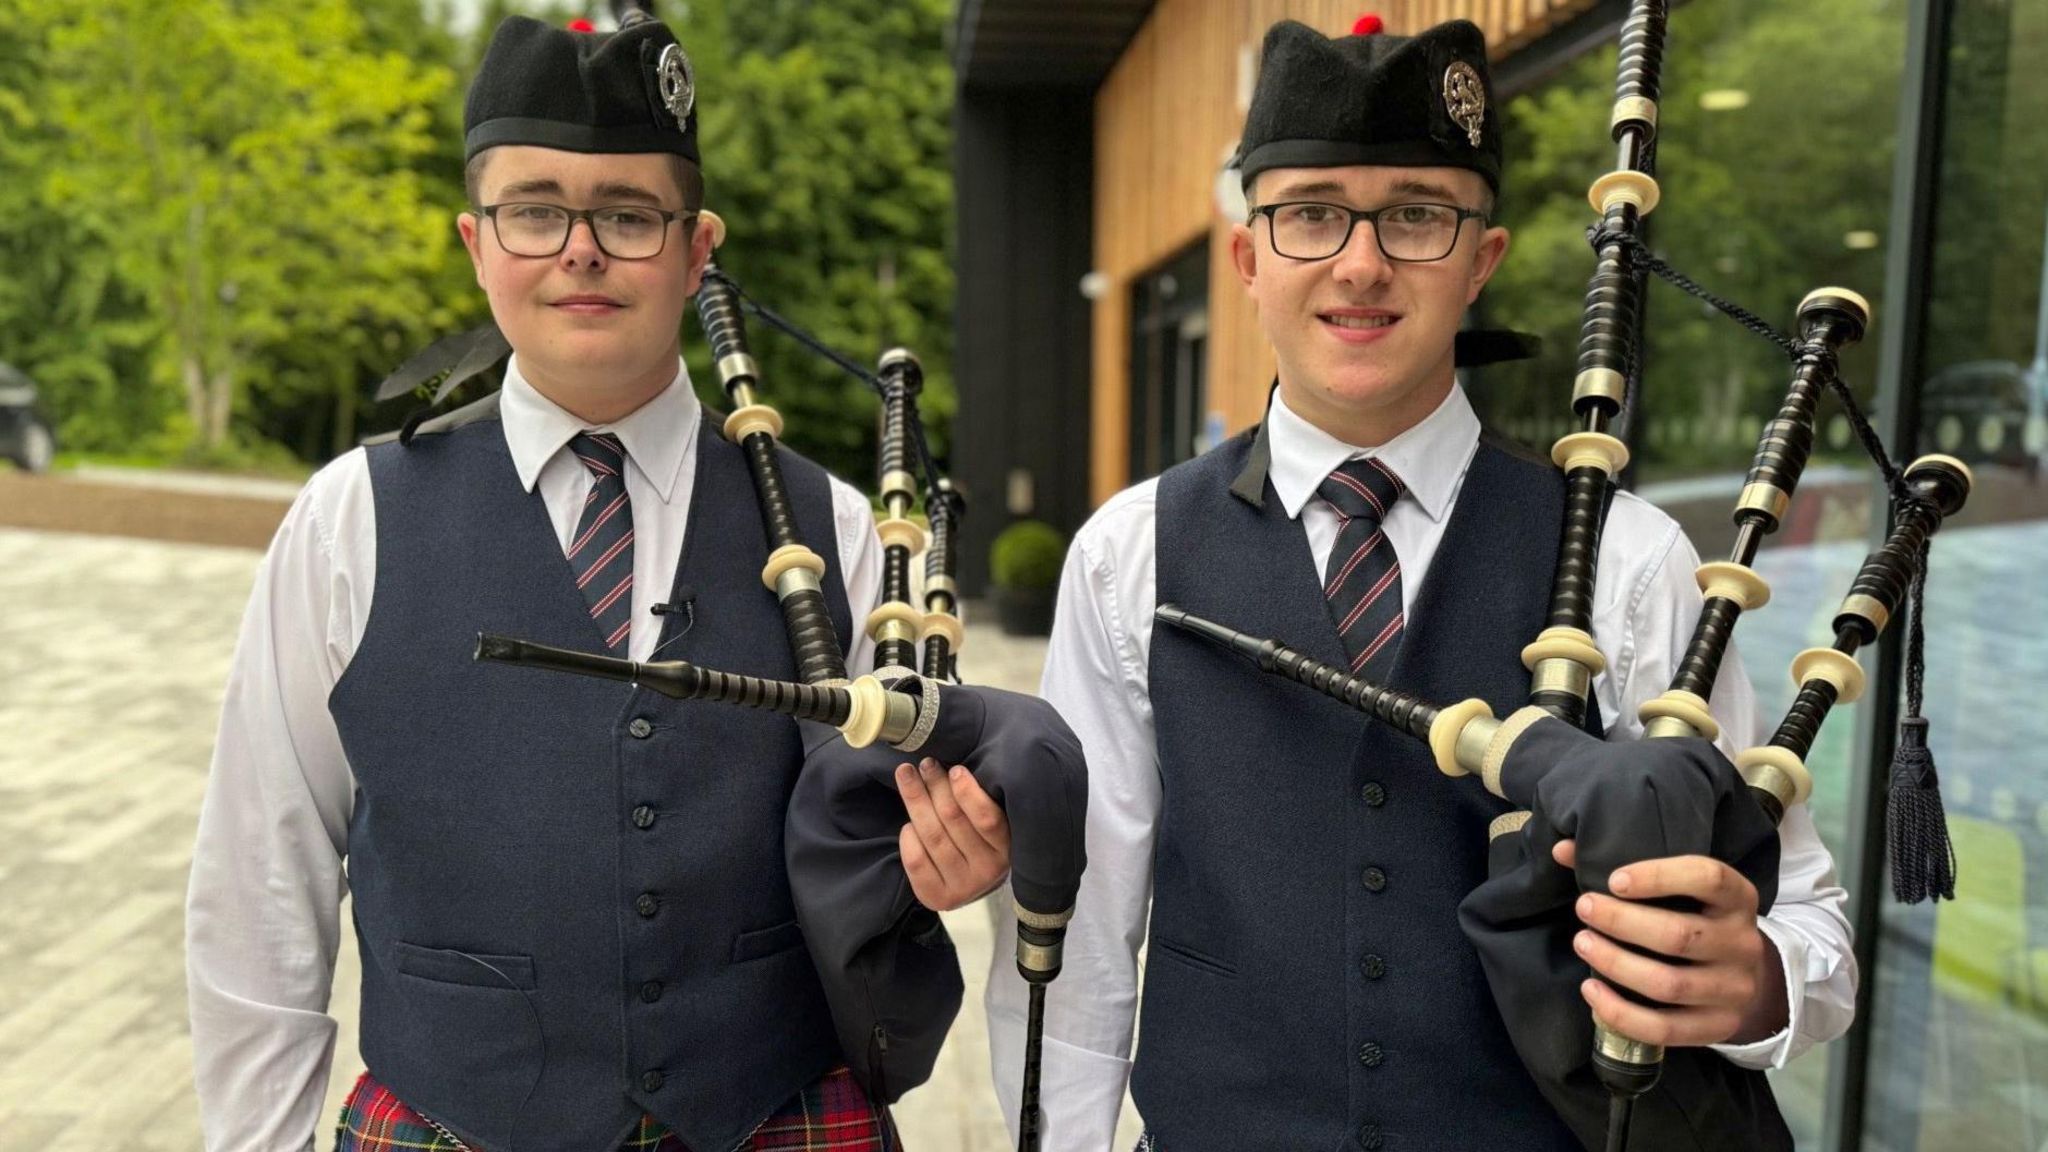 Sixteen-year-old twin brothers Jake and Charlie McAlister are members of the Matt Boyd memorial band